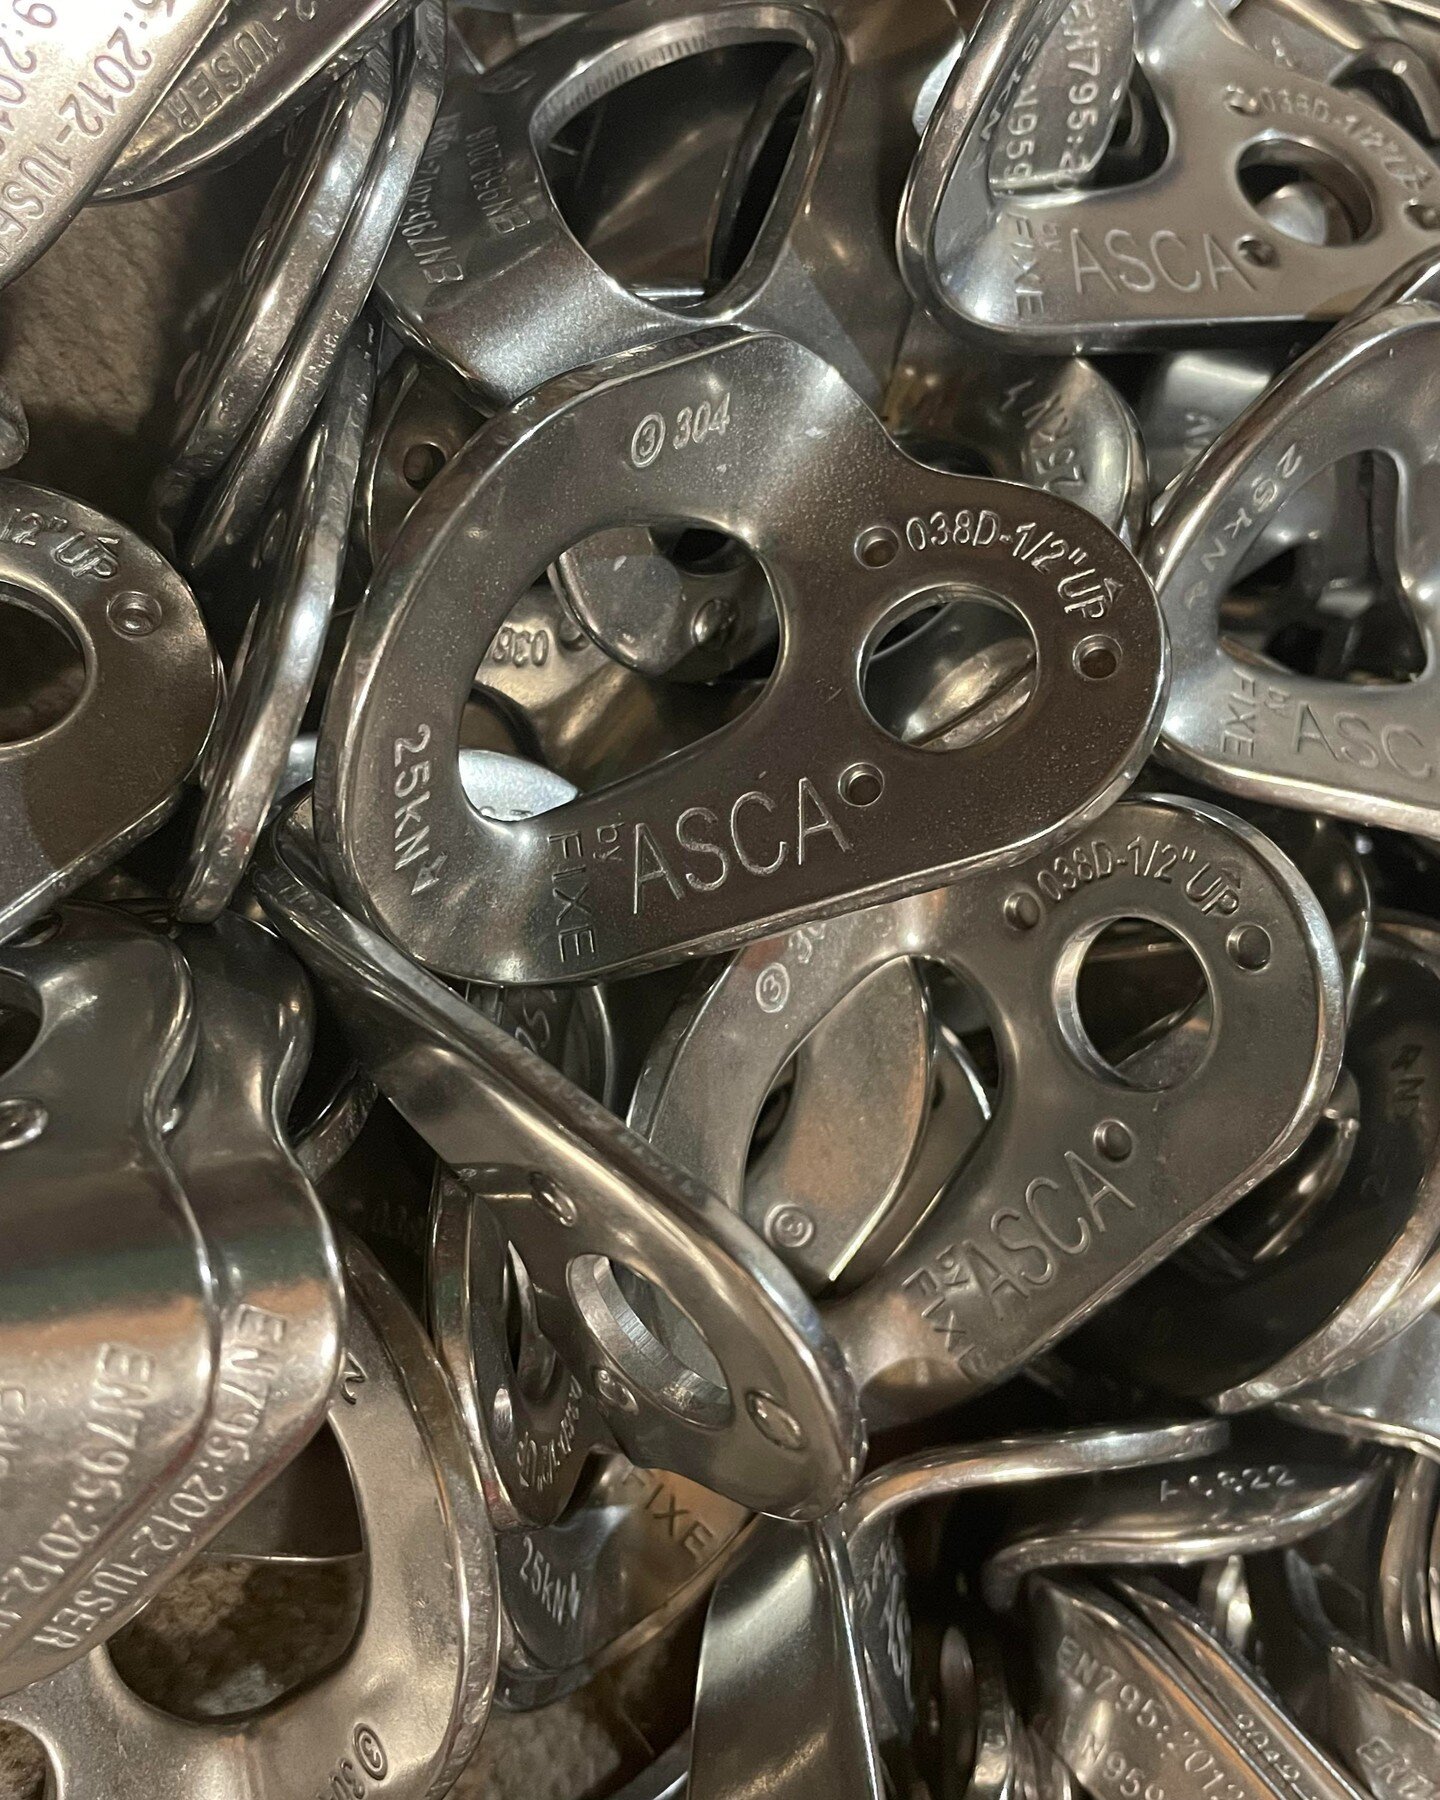 A massive pile of Fixe hardware is back in stock at ASCA HQ to support rebolting efforts across the country! 

If you clip ASCA stamped hangers out at the crag it means a dedicated steward has volunteered their time to make the crag safer for climber